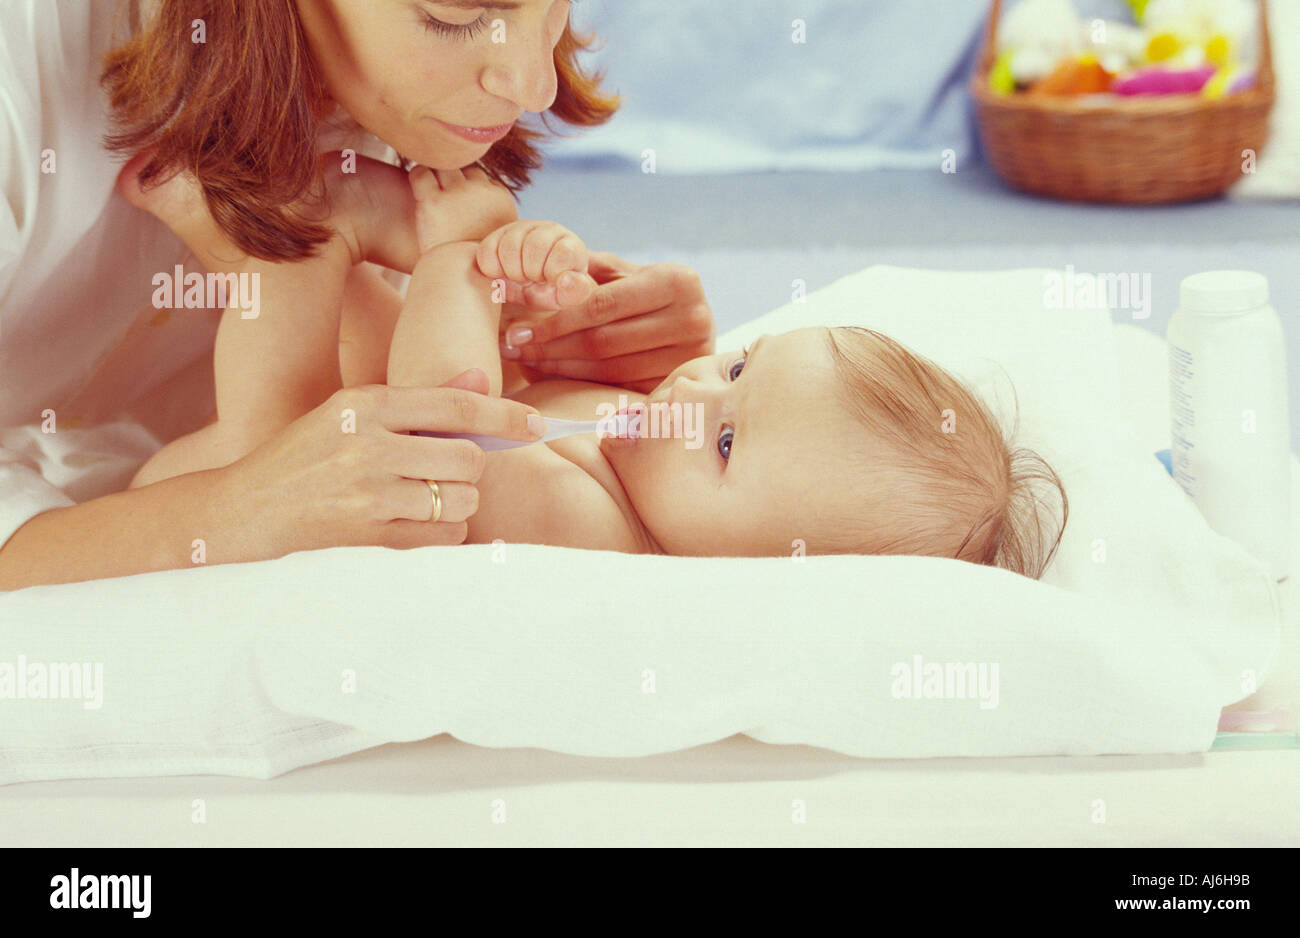 Woman measuring her baby's temperature. Stock Photo